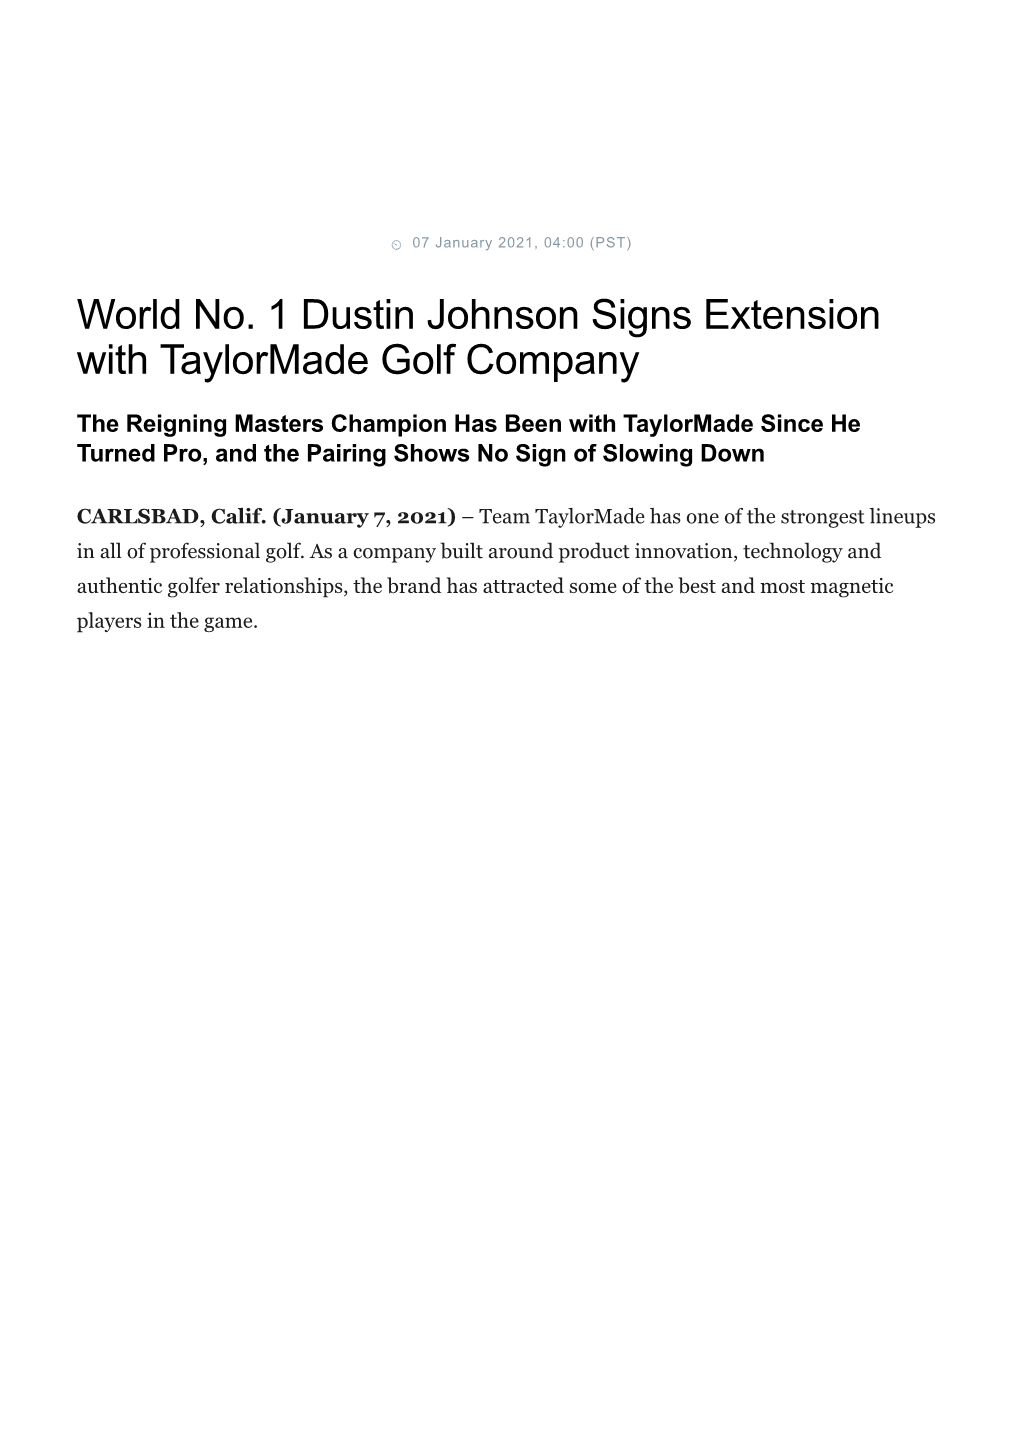 World No. 1 Dustin Johnson Signs Extension with Taylormade Golf Company